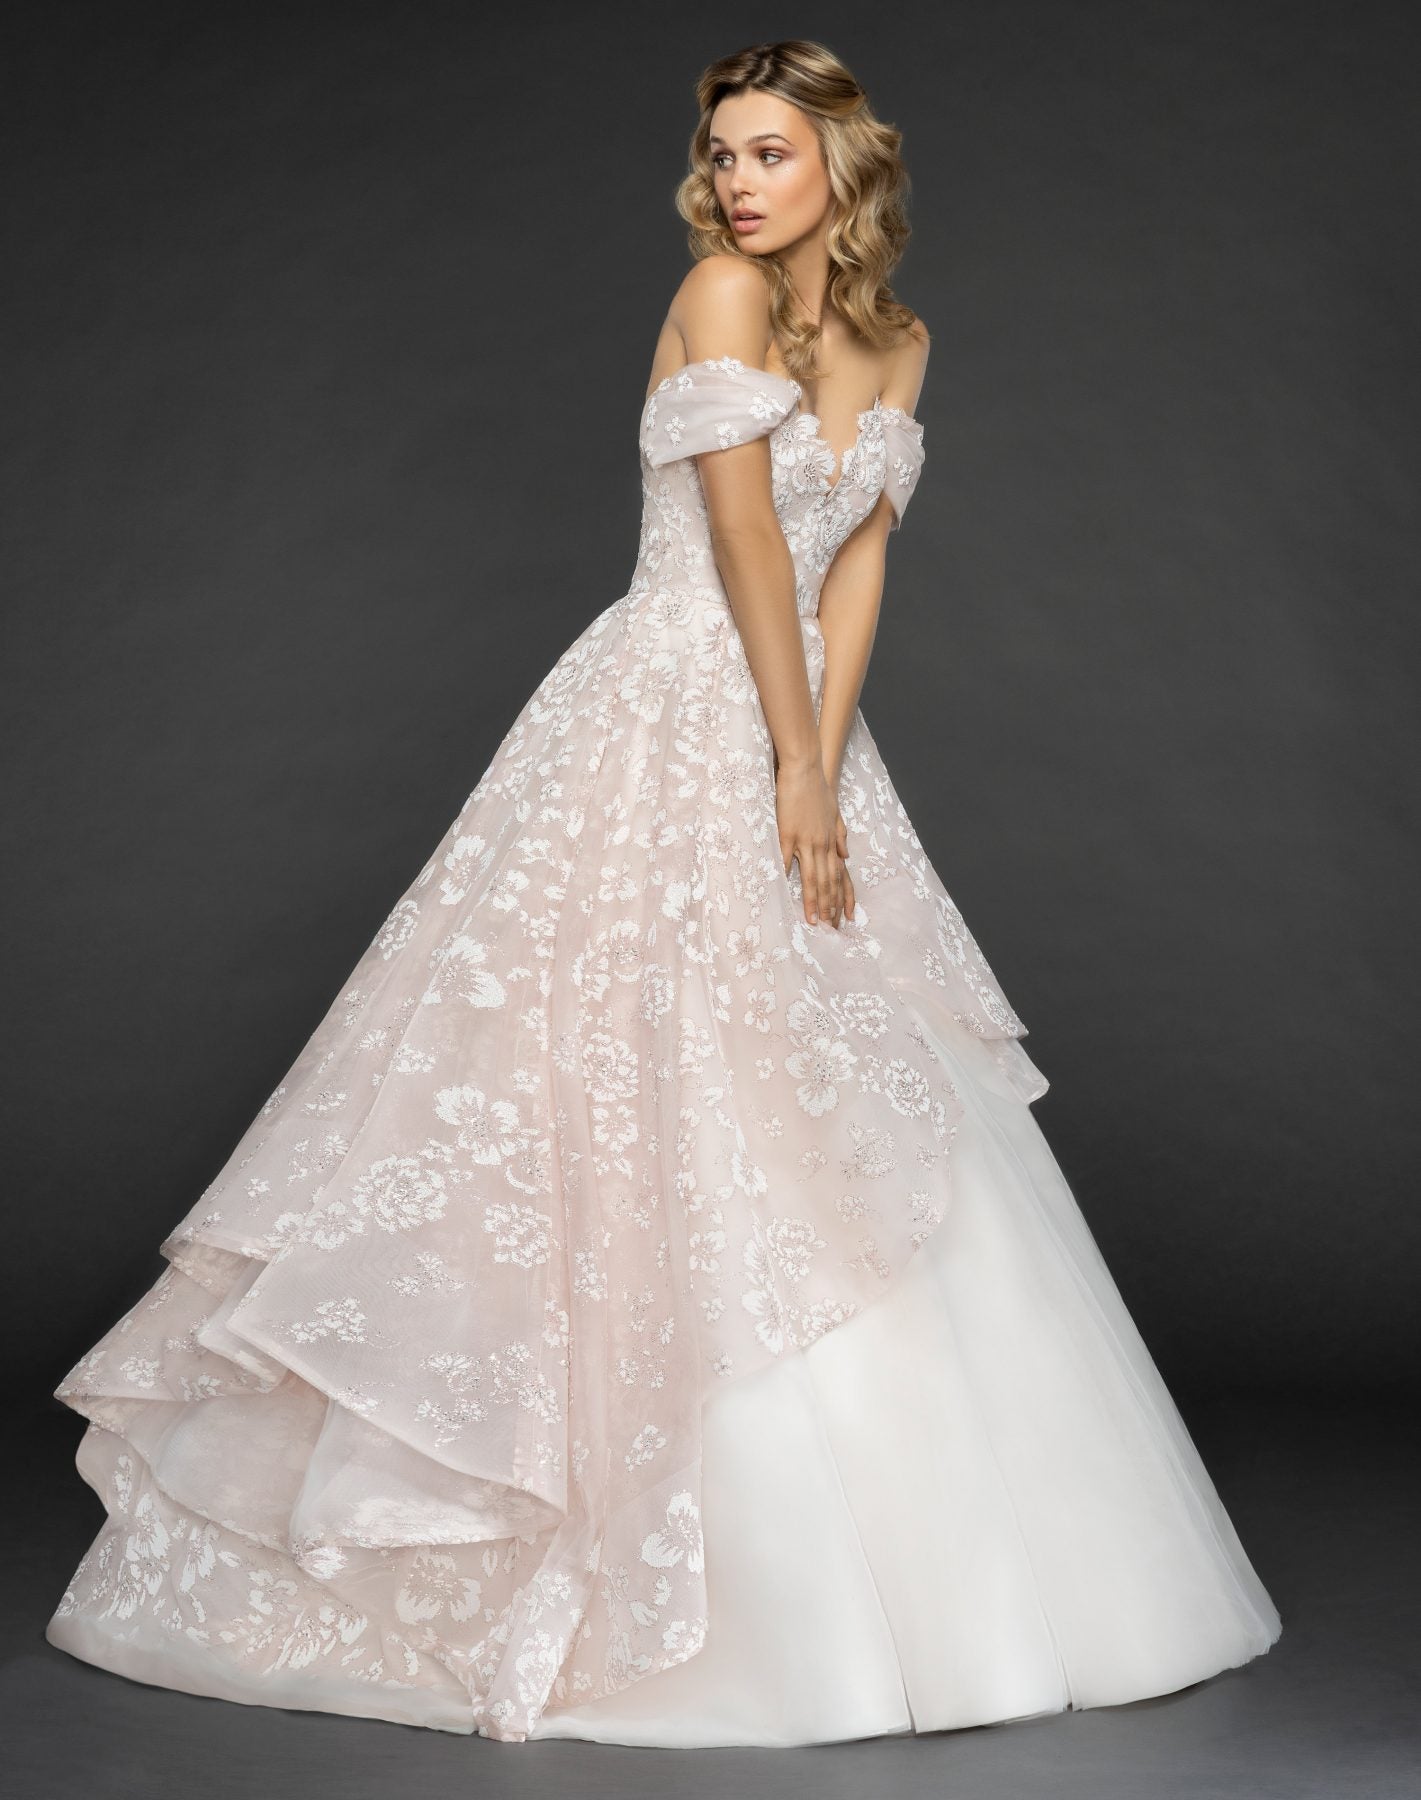 hayley-paige-off-the-shoulder-floral-embroidered-ball-gown-wedding-dress-33858804-1421x1800.jpg